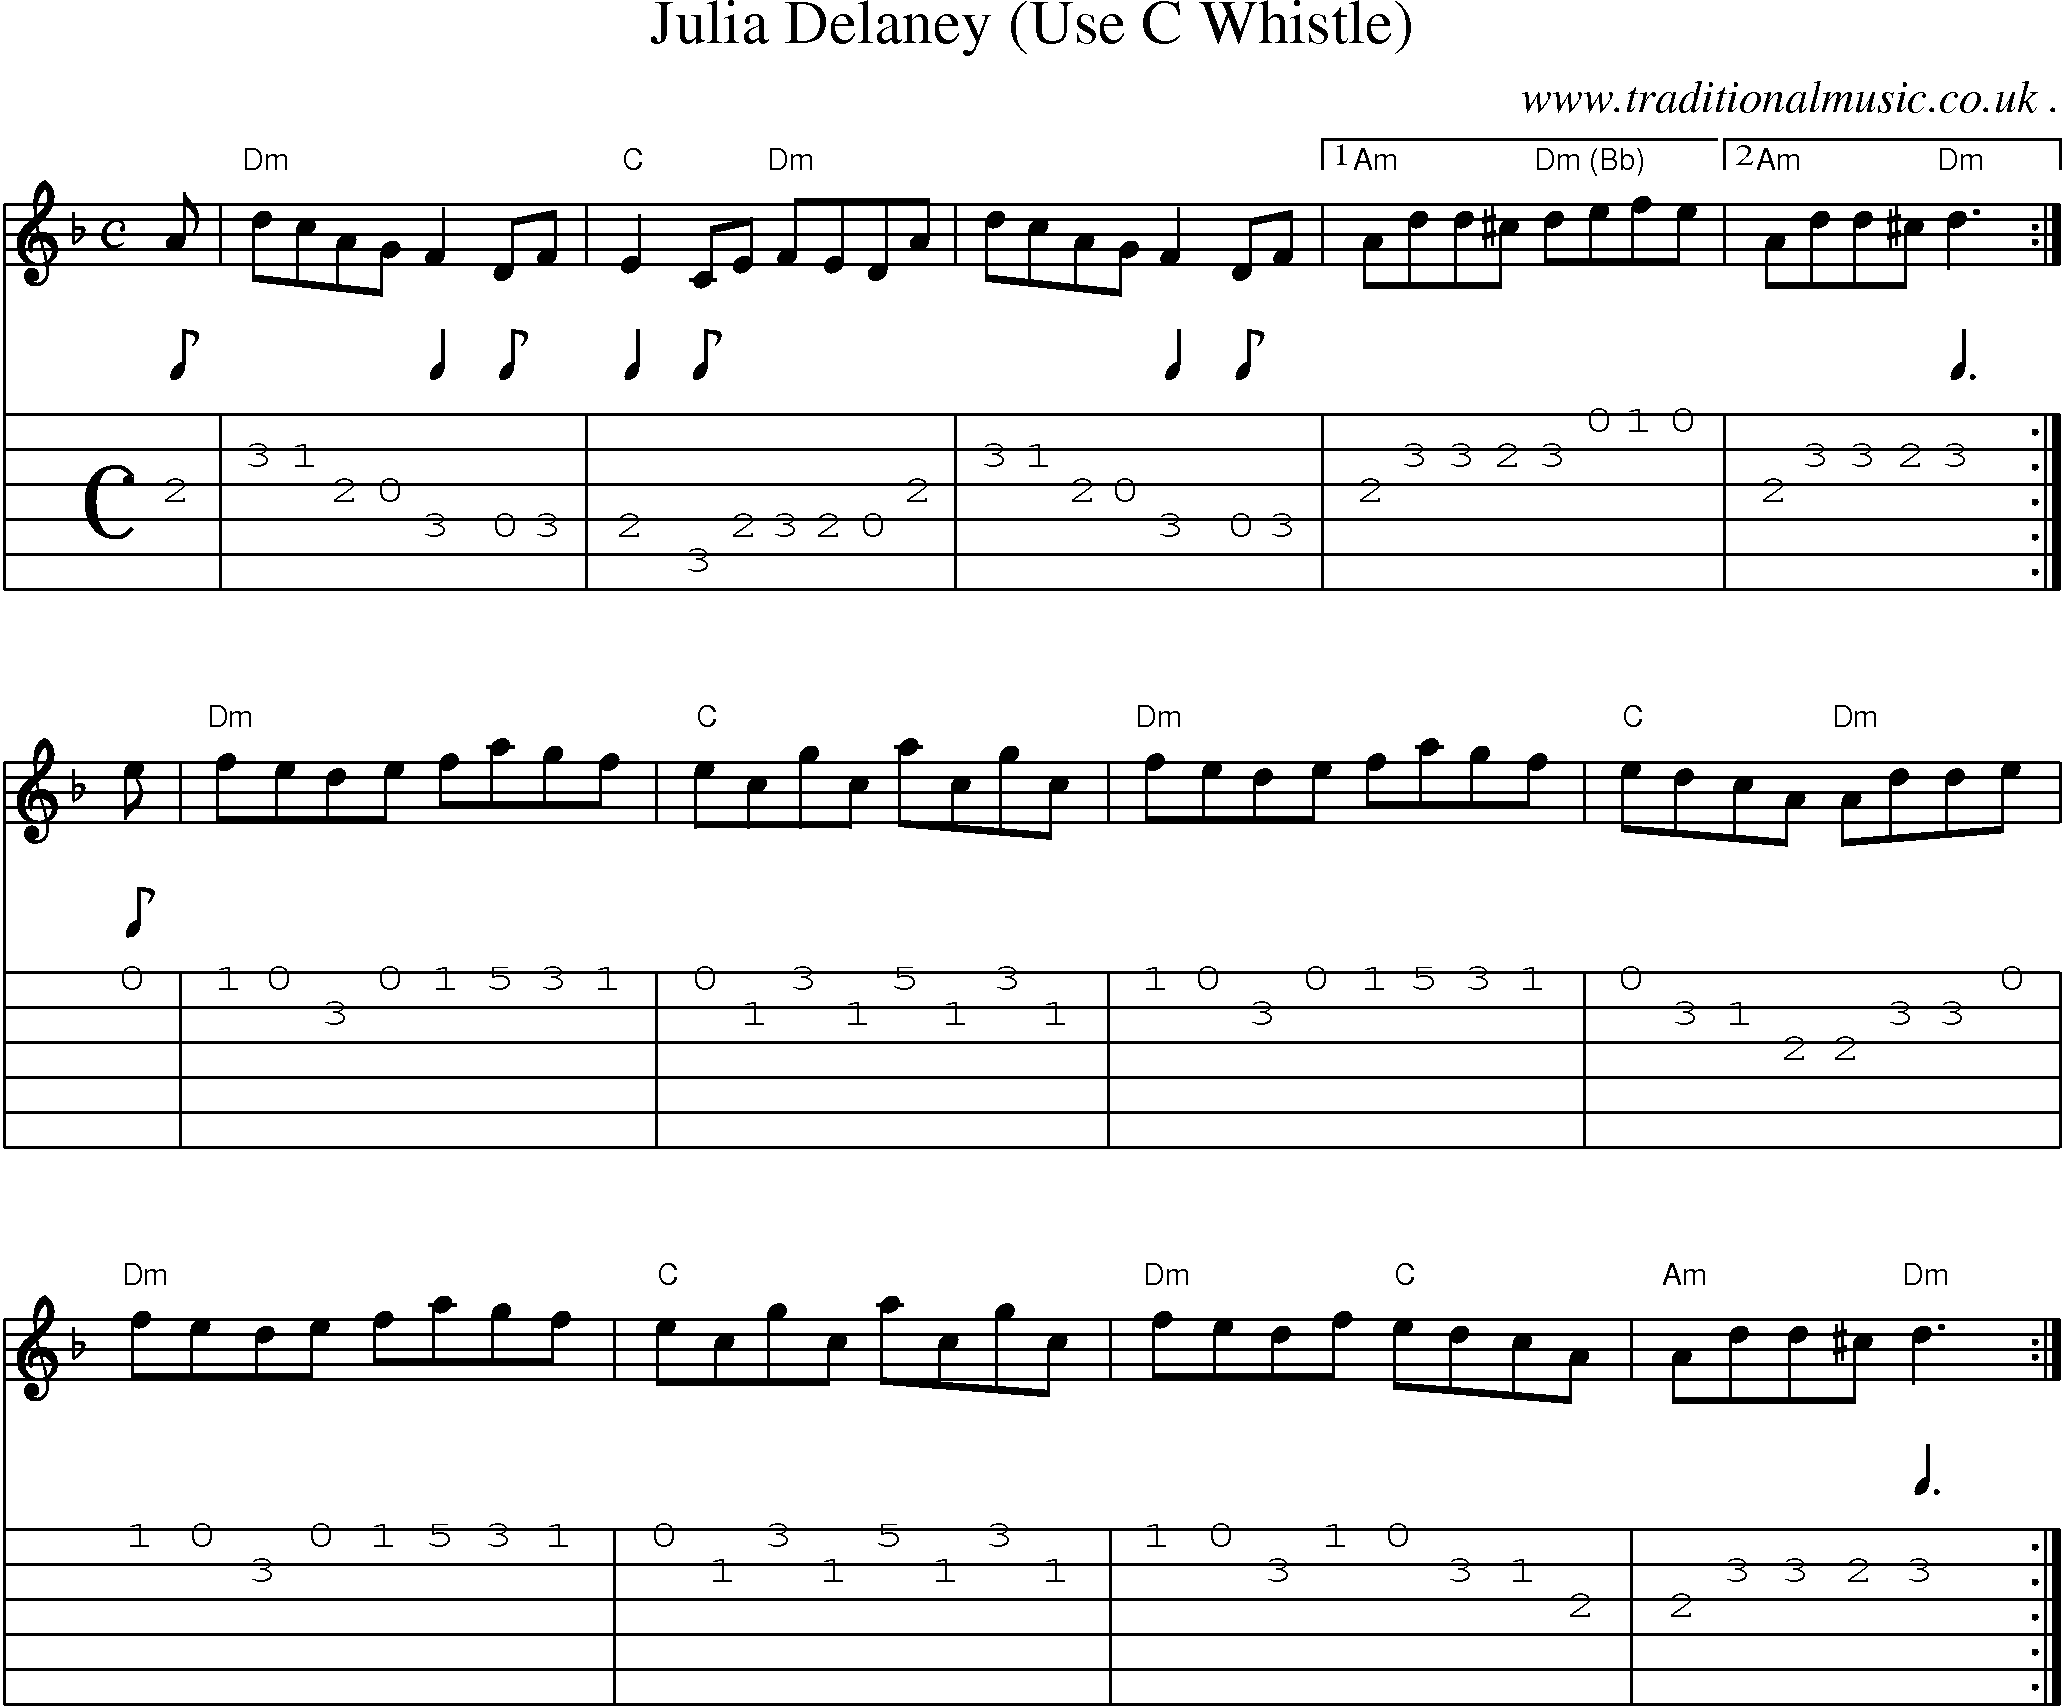 Sheet-music  score, Chords and Guitar Tabs for Julia Delaney Use C Whistle